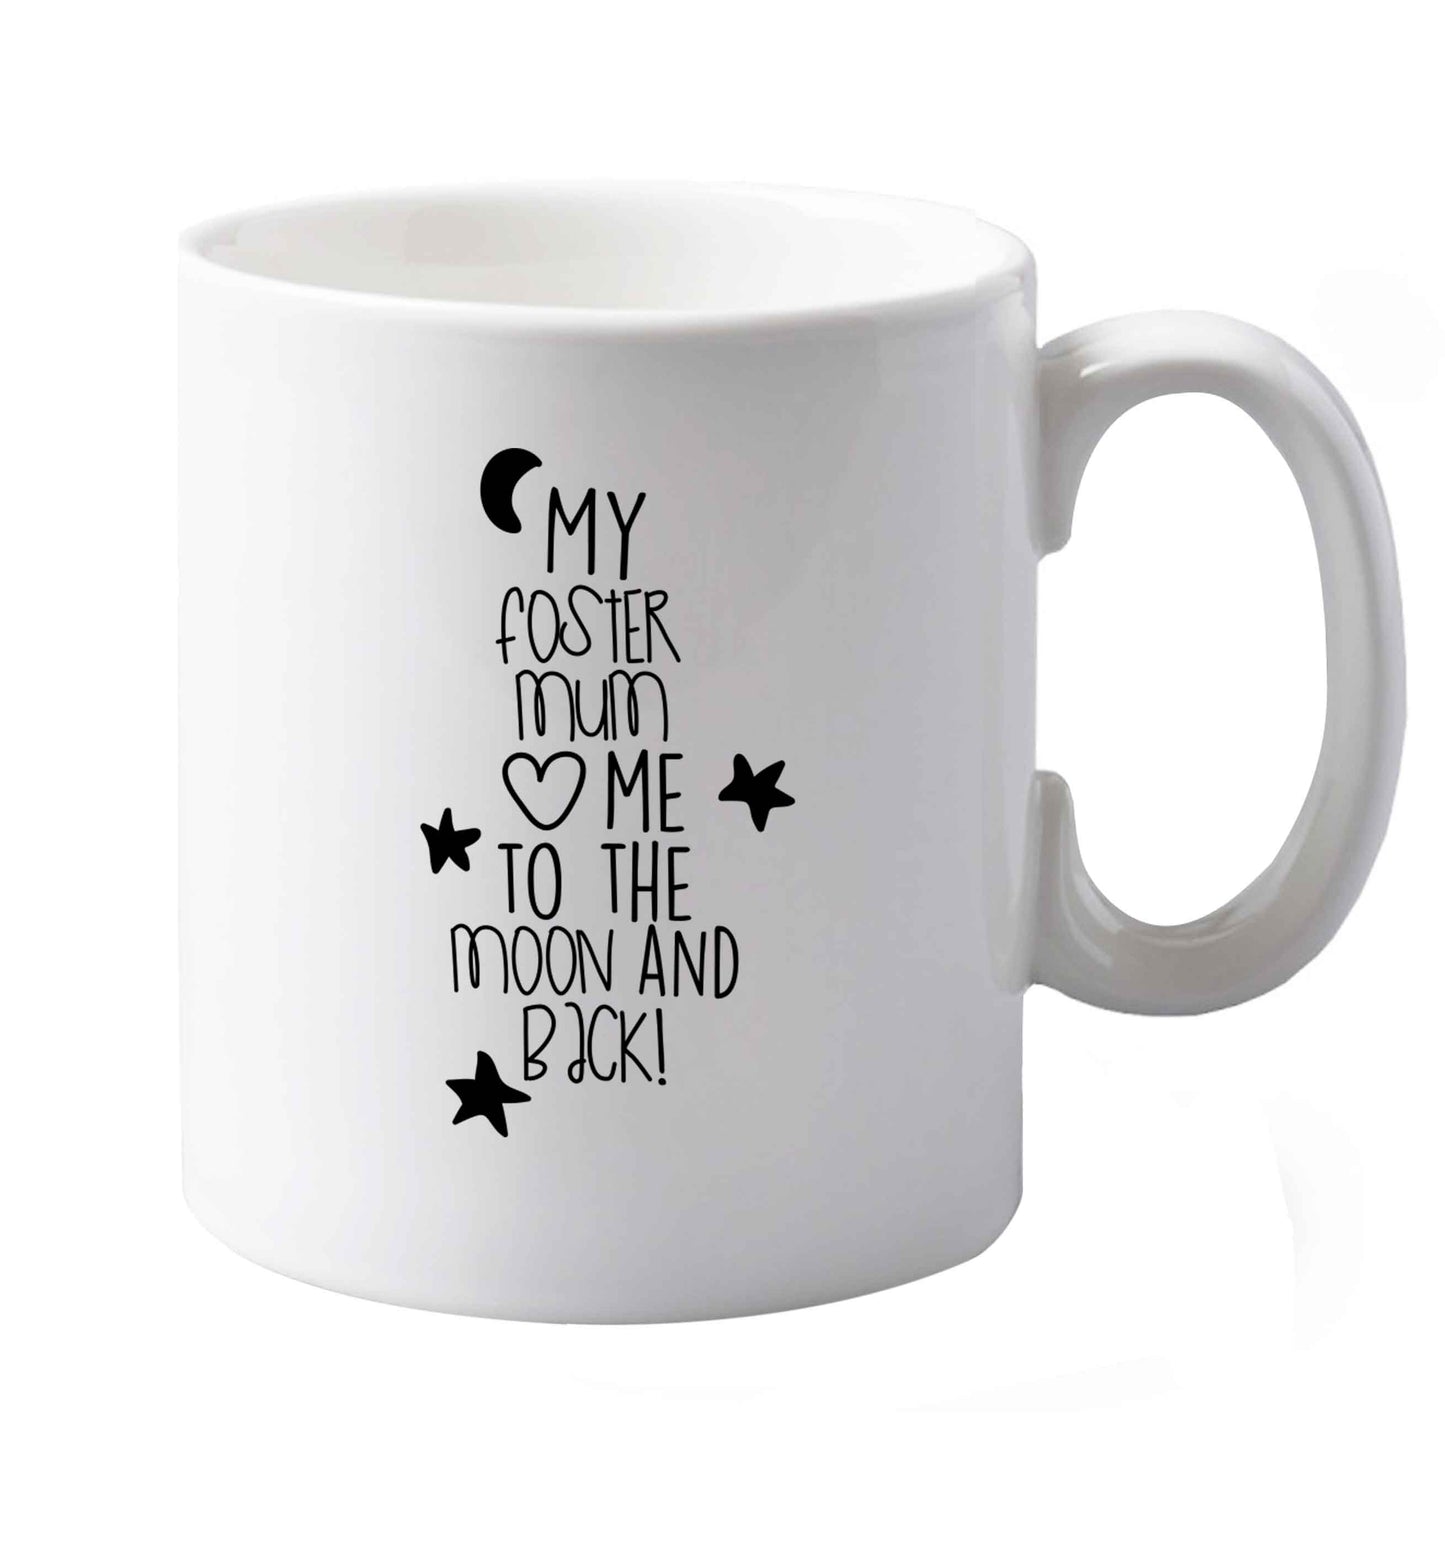 10 oz My foster mum loves me to the moon and back ceramic mug both sides